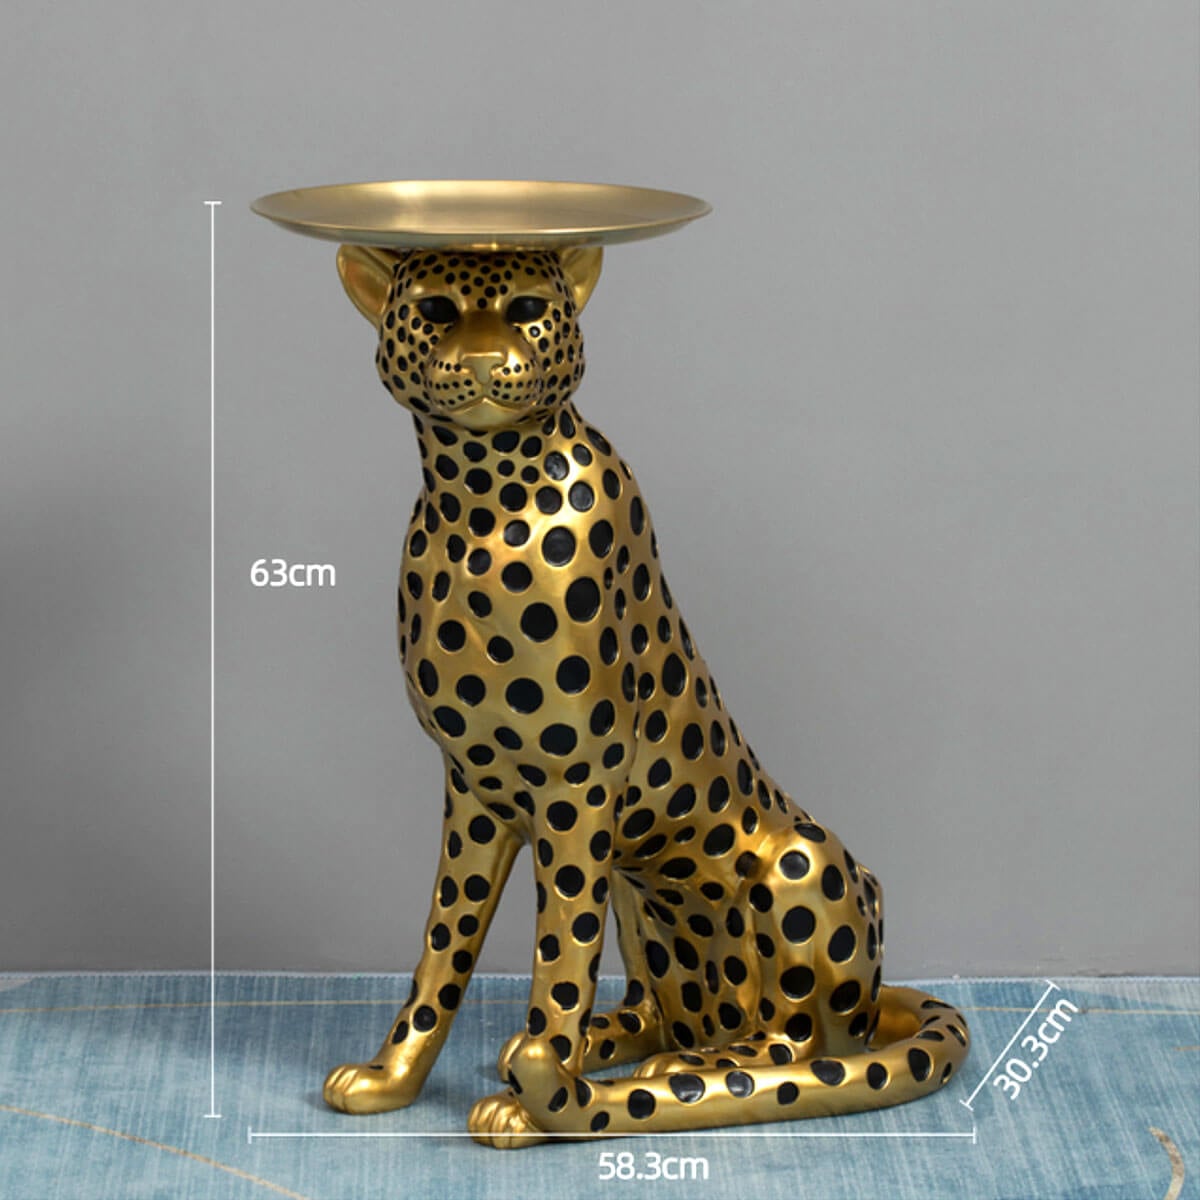 Modern Jungle Vibes - Leopard Side Table for a Unique Home Design Touch